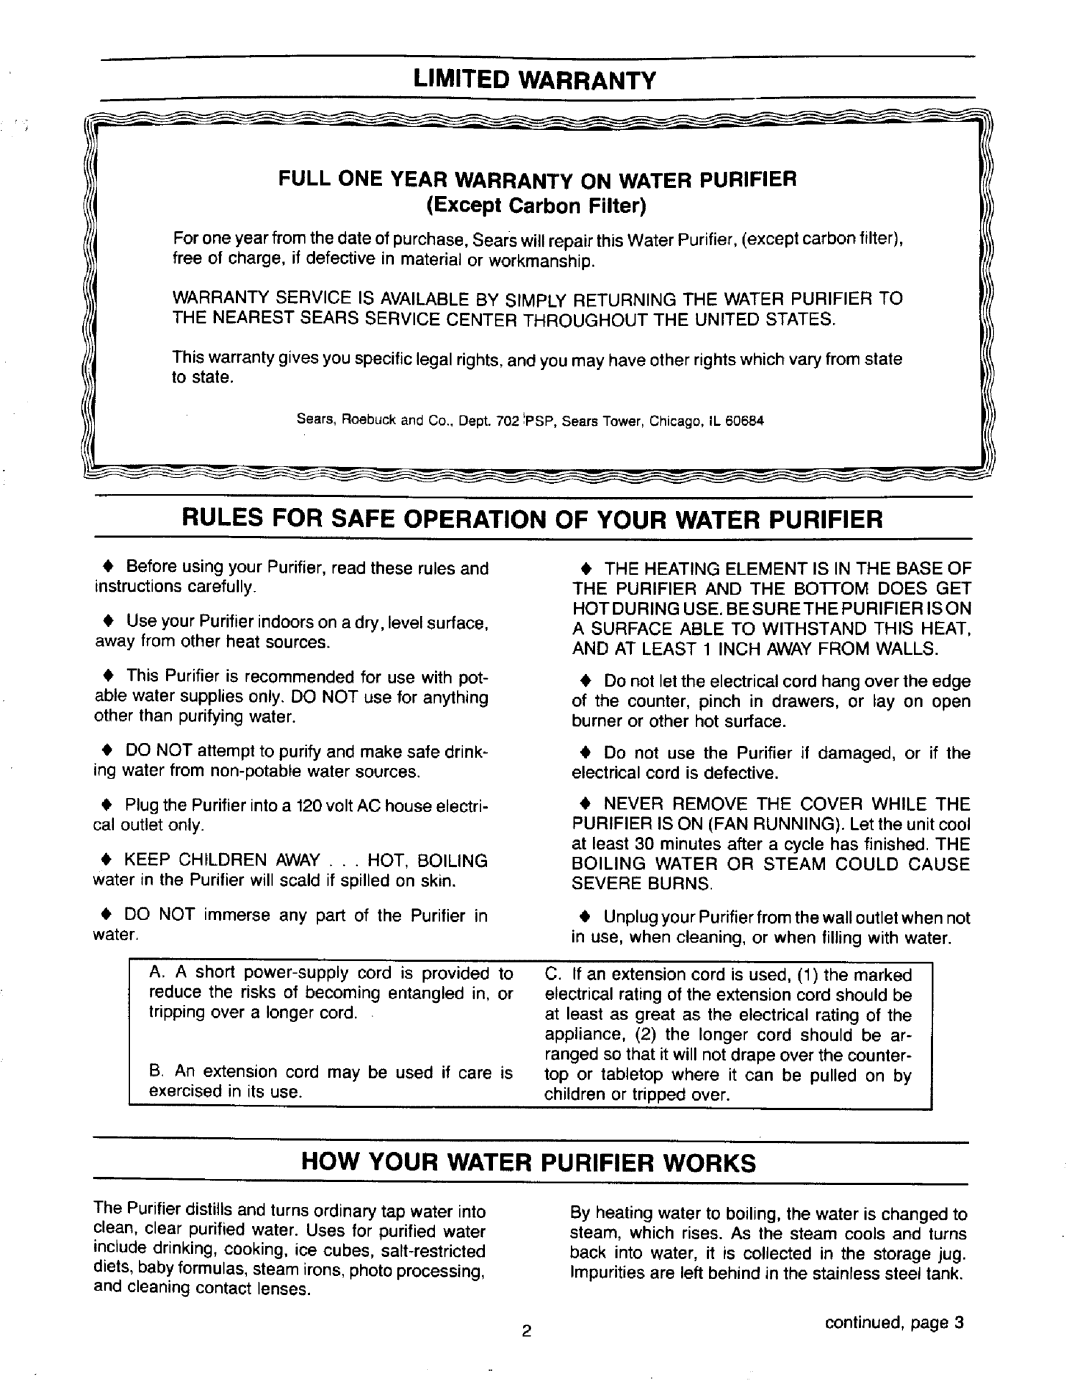 Sears 625.3444 Limited Warranty, Rules For Safe Operation Of Your Water Purifier, How Your Water Purifier Works 